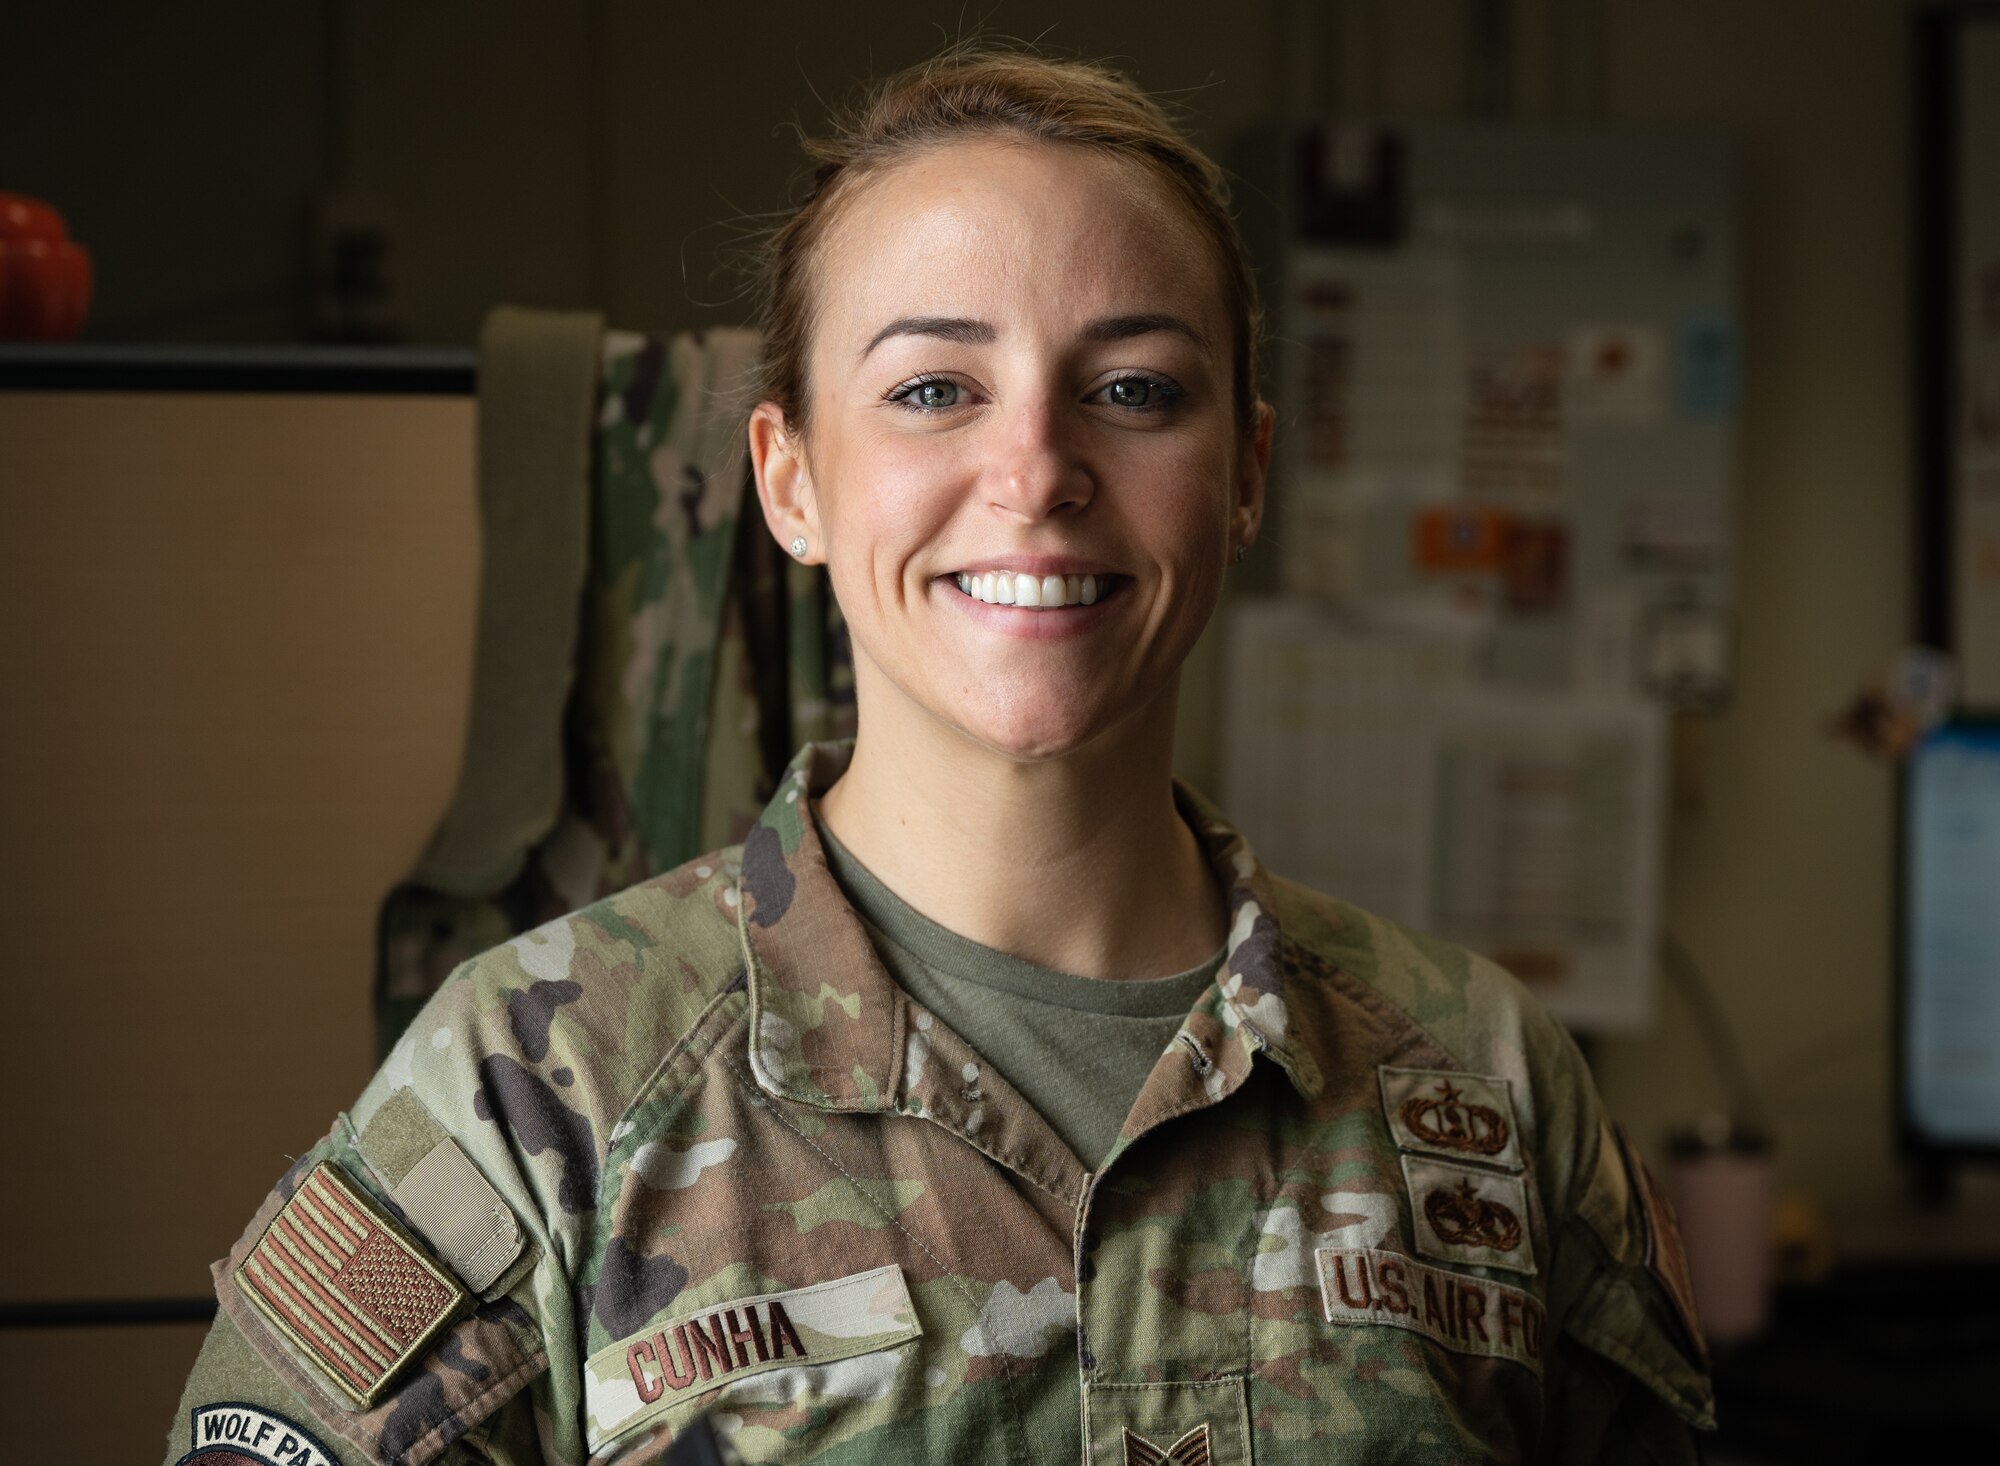 Tech. Sgt. Tiffany Cunha, 8th Fighter Wing command chief executive assistant, smiles for a portrait at Kunsan Air Base, Republic of Korea, Mar. 16, 2023.